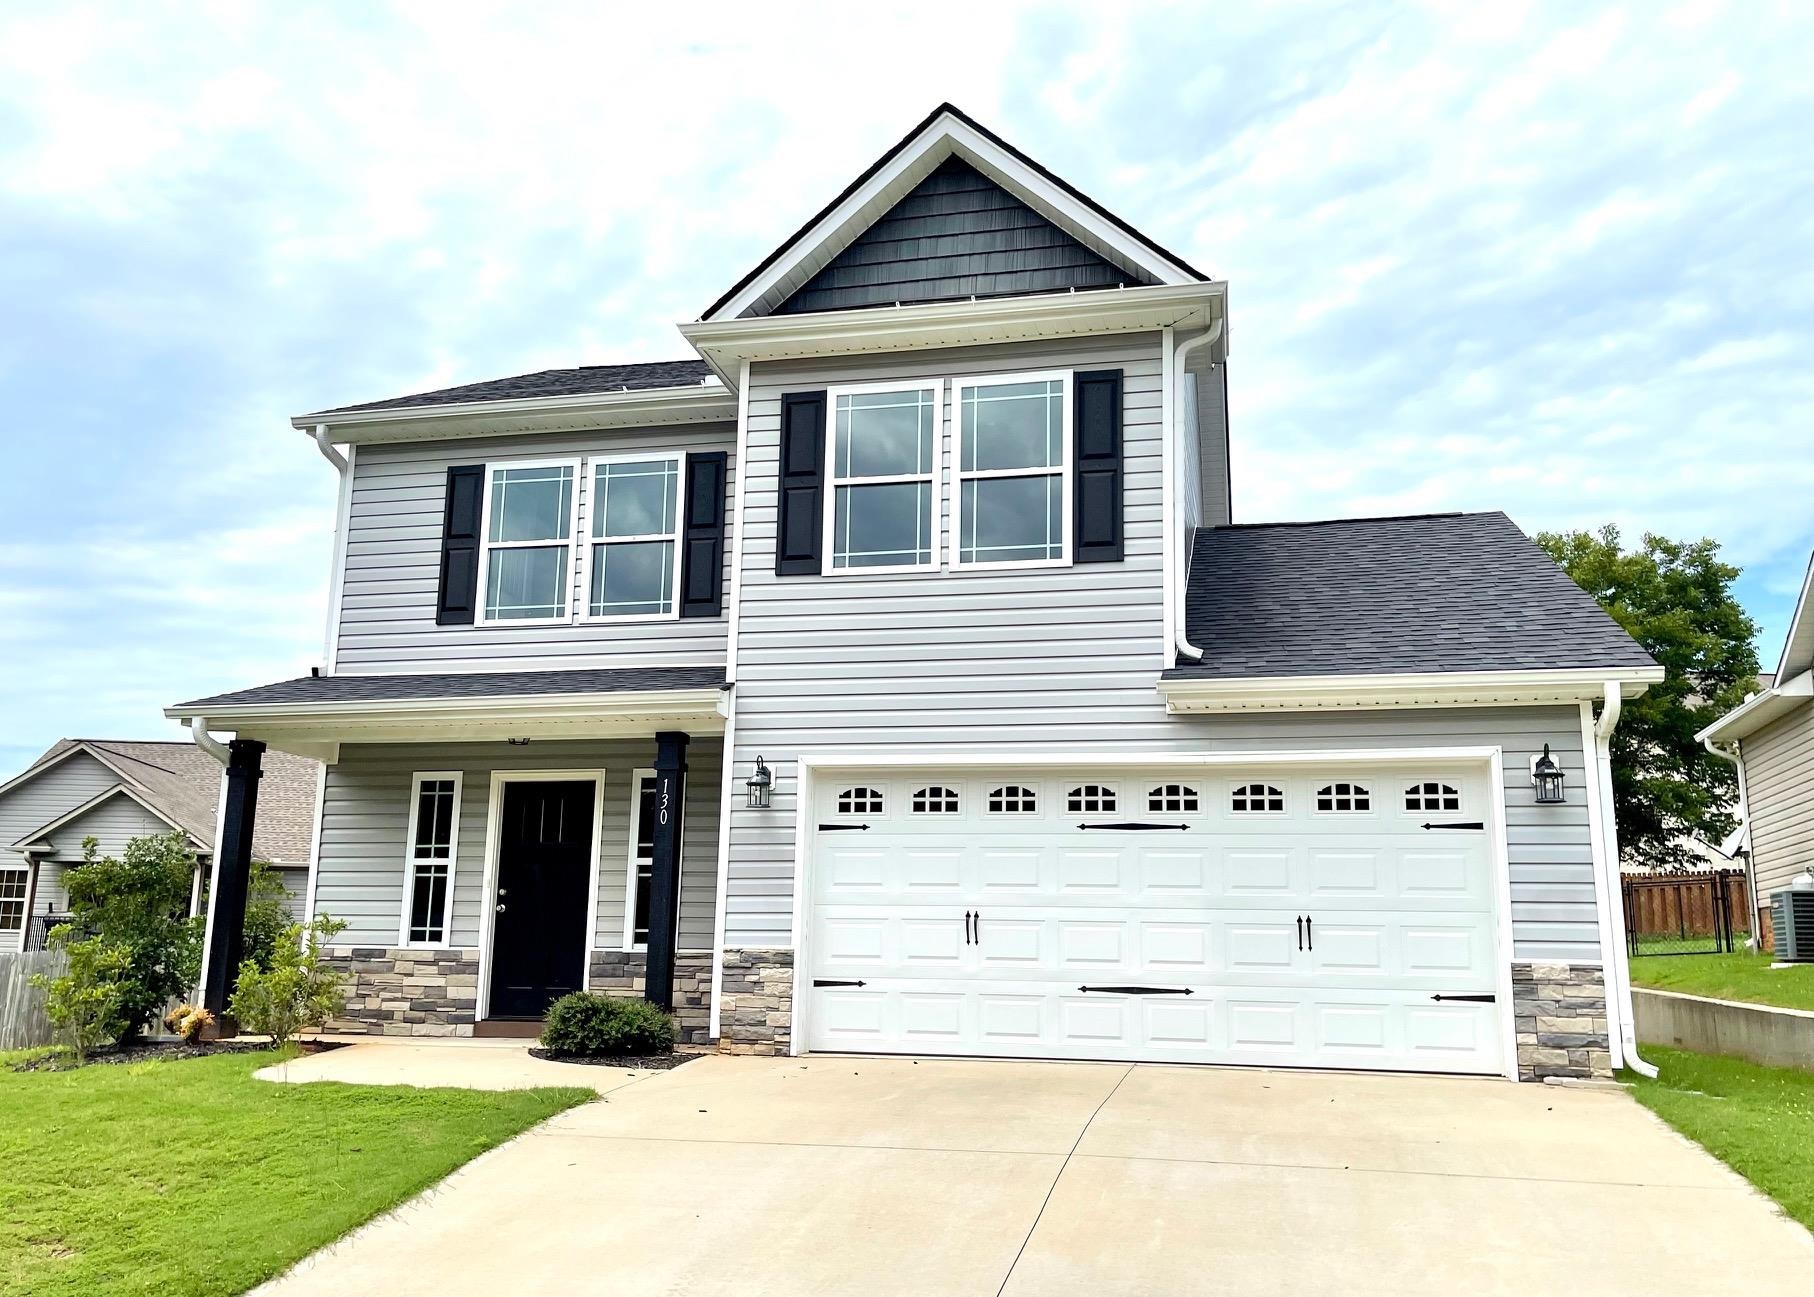 Quality home! Builtin 2019  by local builder in the quiet community of Harvest Ridge. Crown Molding, Granite, Insulated Garage Door, Stone, Large Lot! Must See!